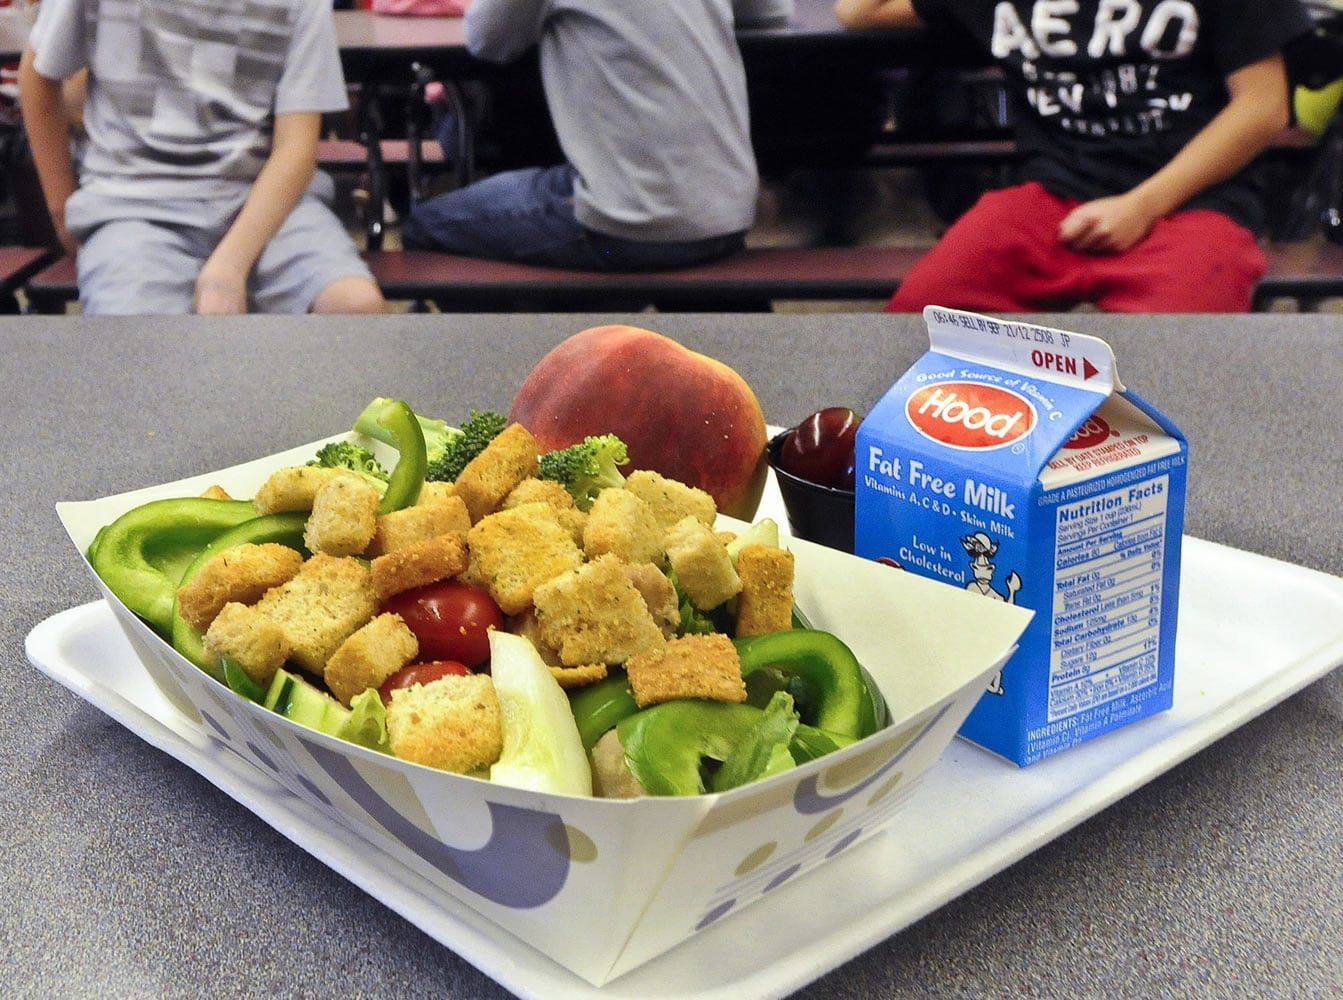 A healthy chicken salad school lunch, prepared under federal guidelines, sitting on display at the cafeteria at Draper Middle School in Rotterdam, N.Y.